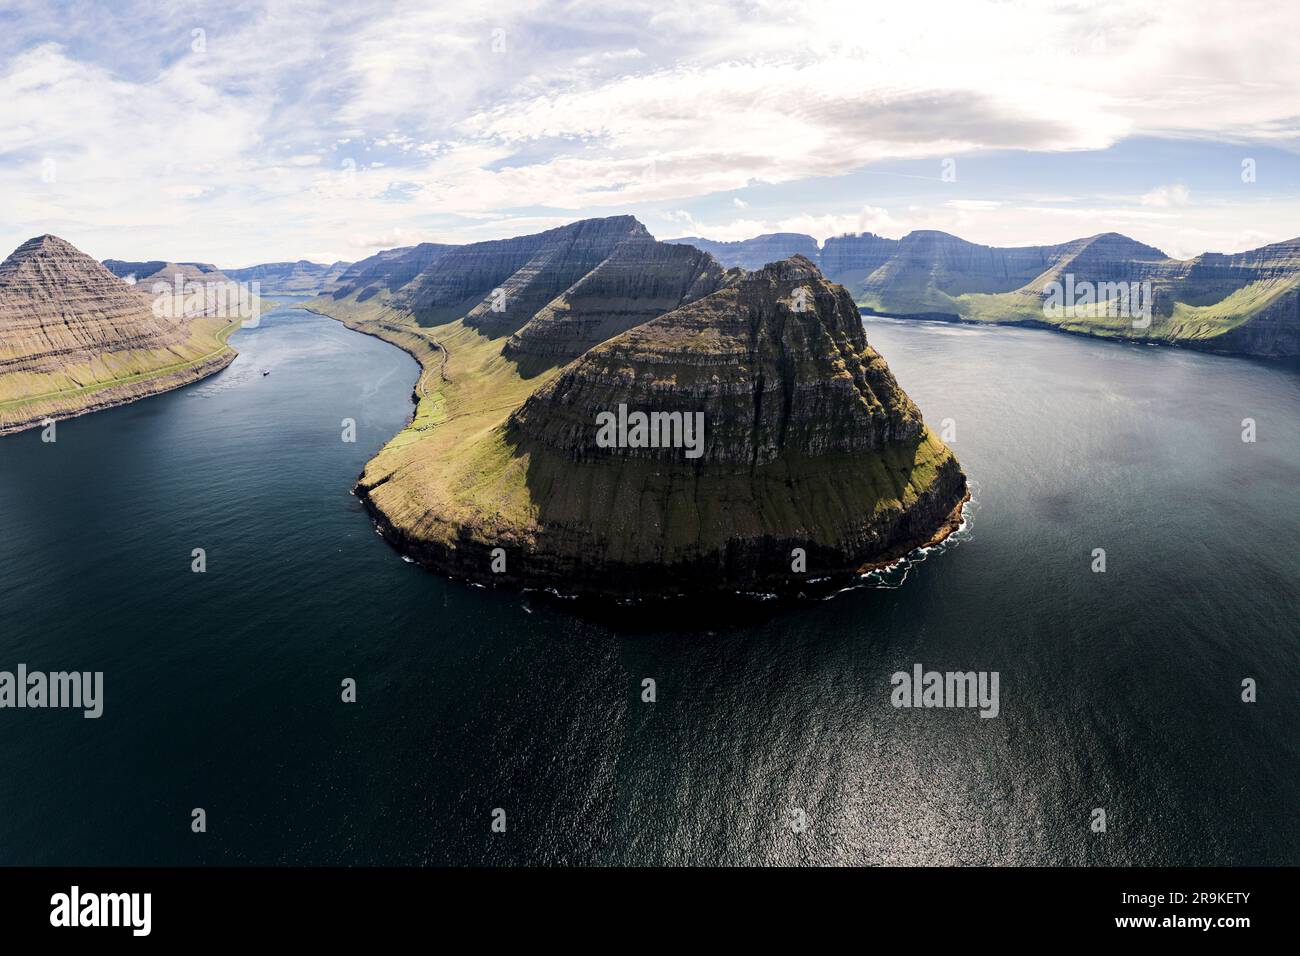 Panoramic of mountains and cliffs along the fjord in summer, aerial view, Muli, Bordoy island, Faroe Islands, Denmark Stock Photo